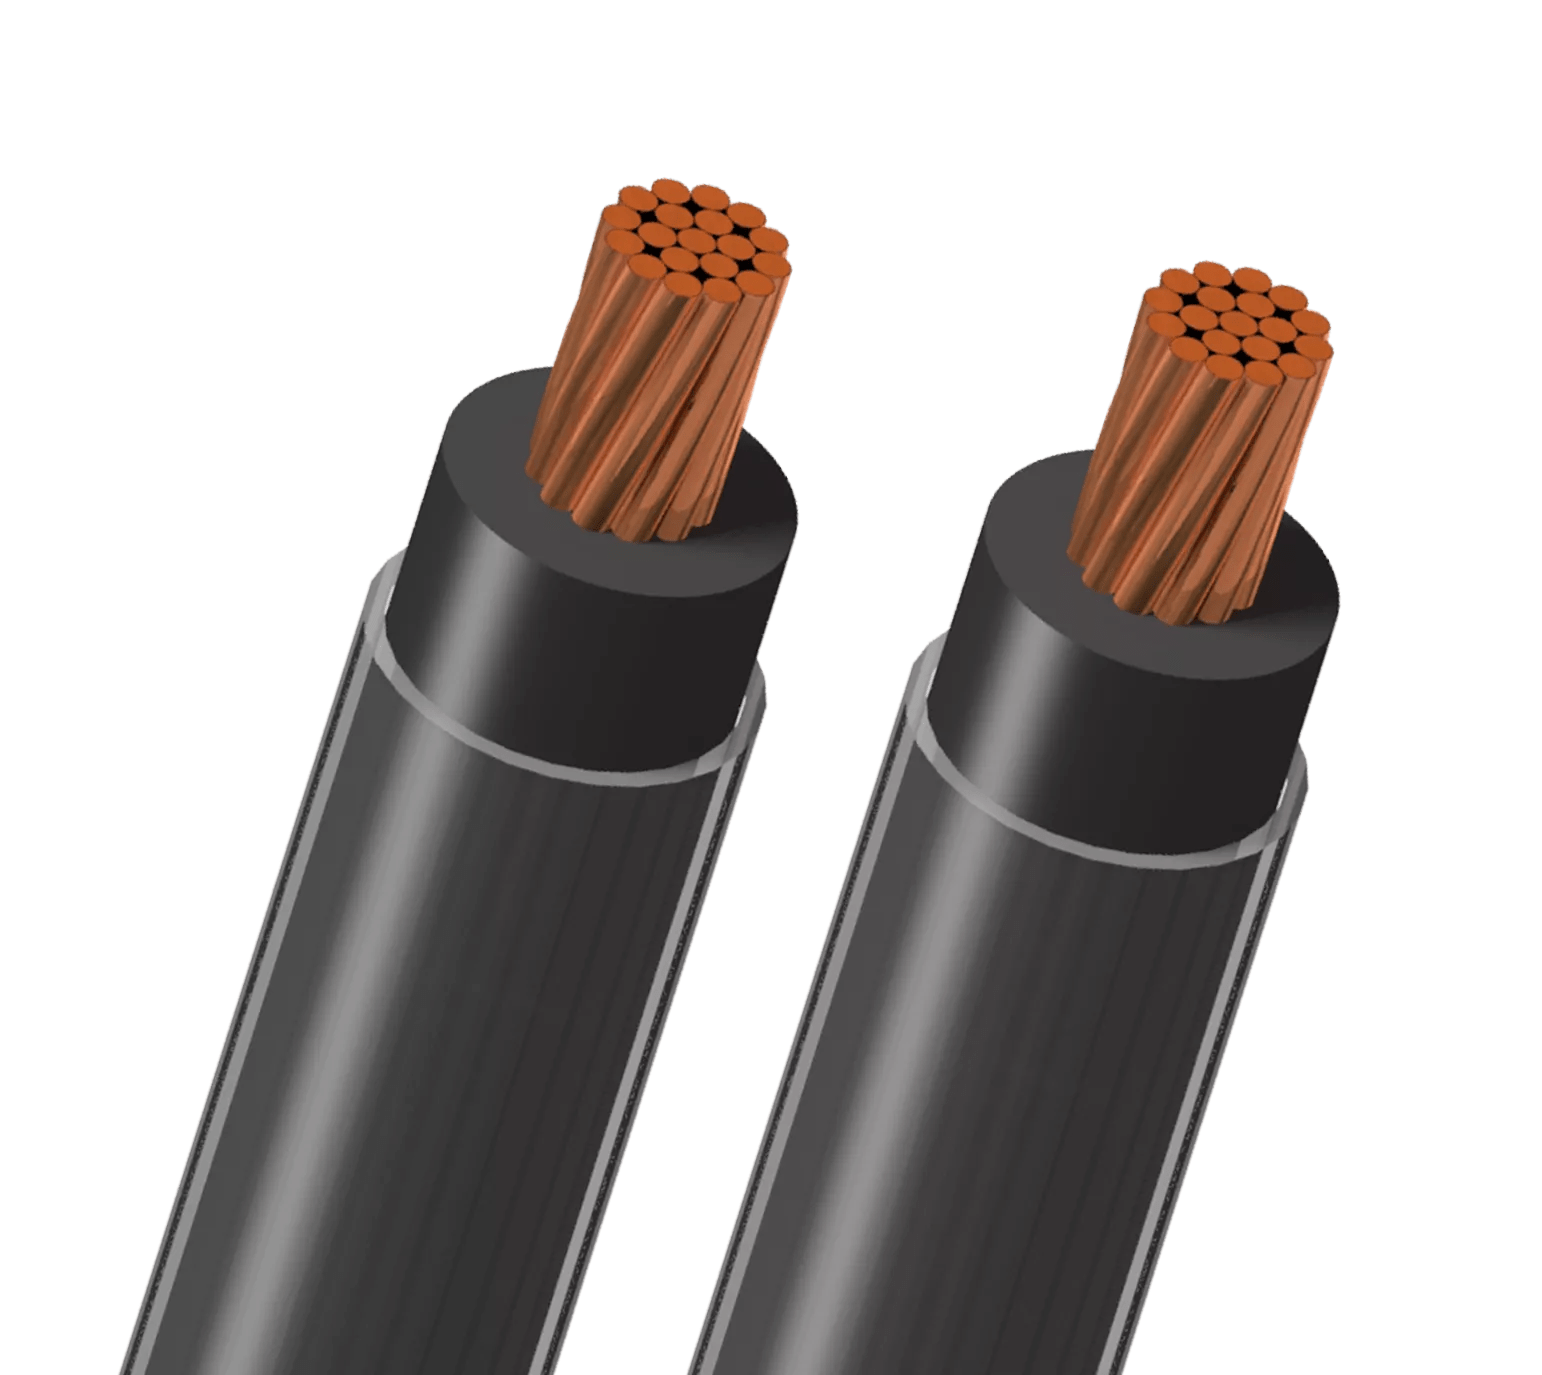 Cable and insulated wire safety requirements—Part 3: Fixed vs. flexible  applications